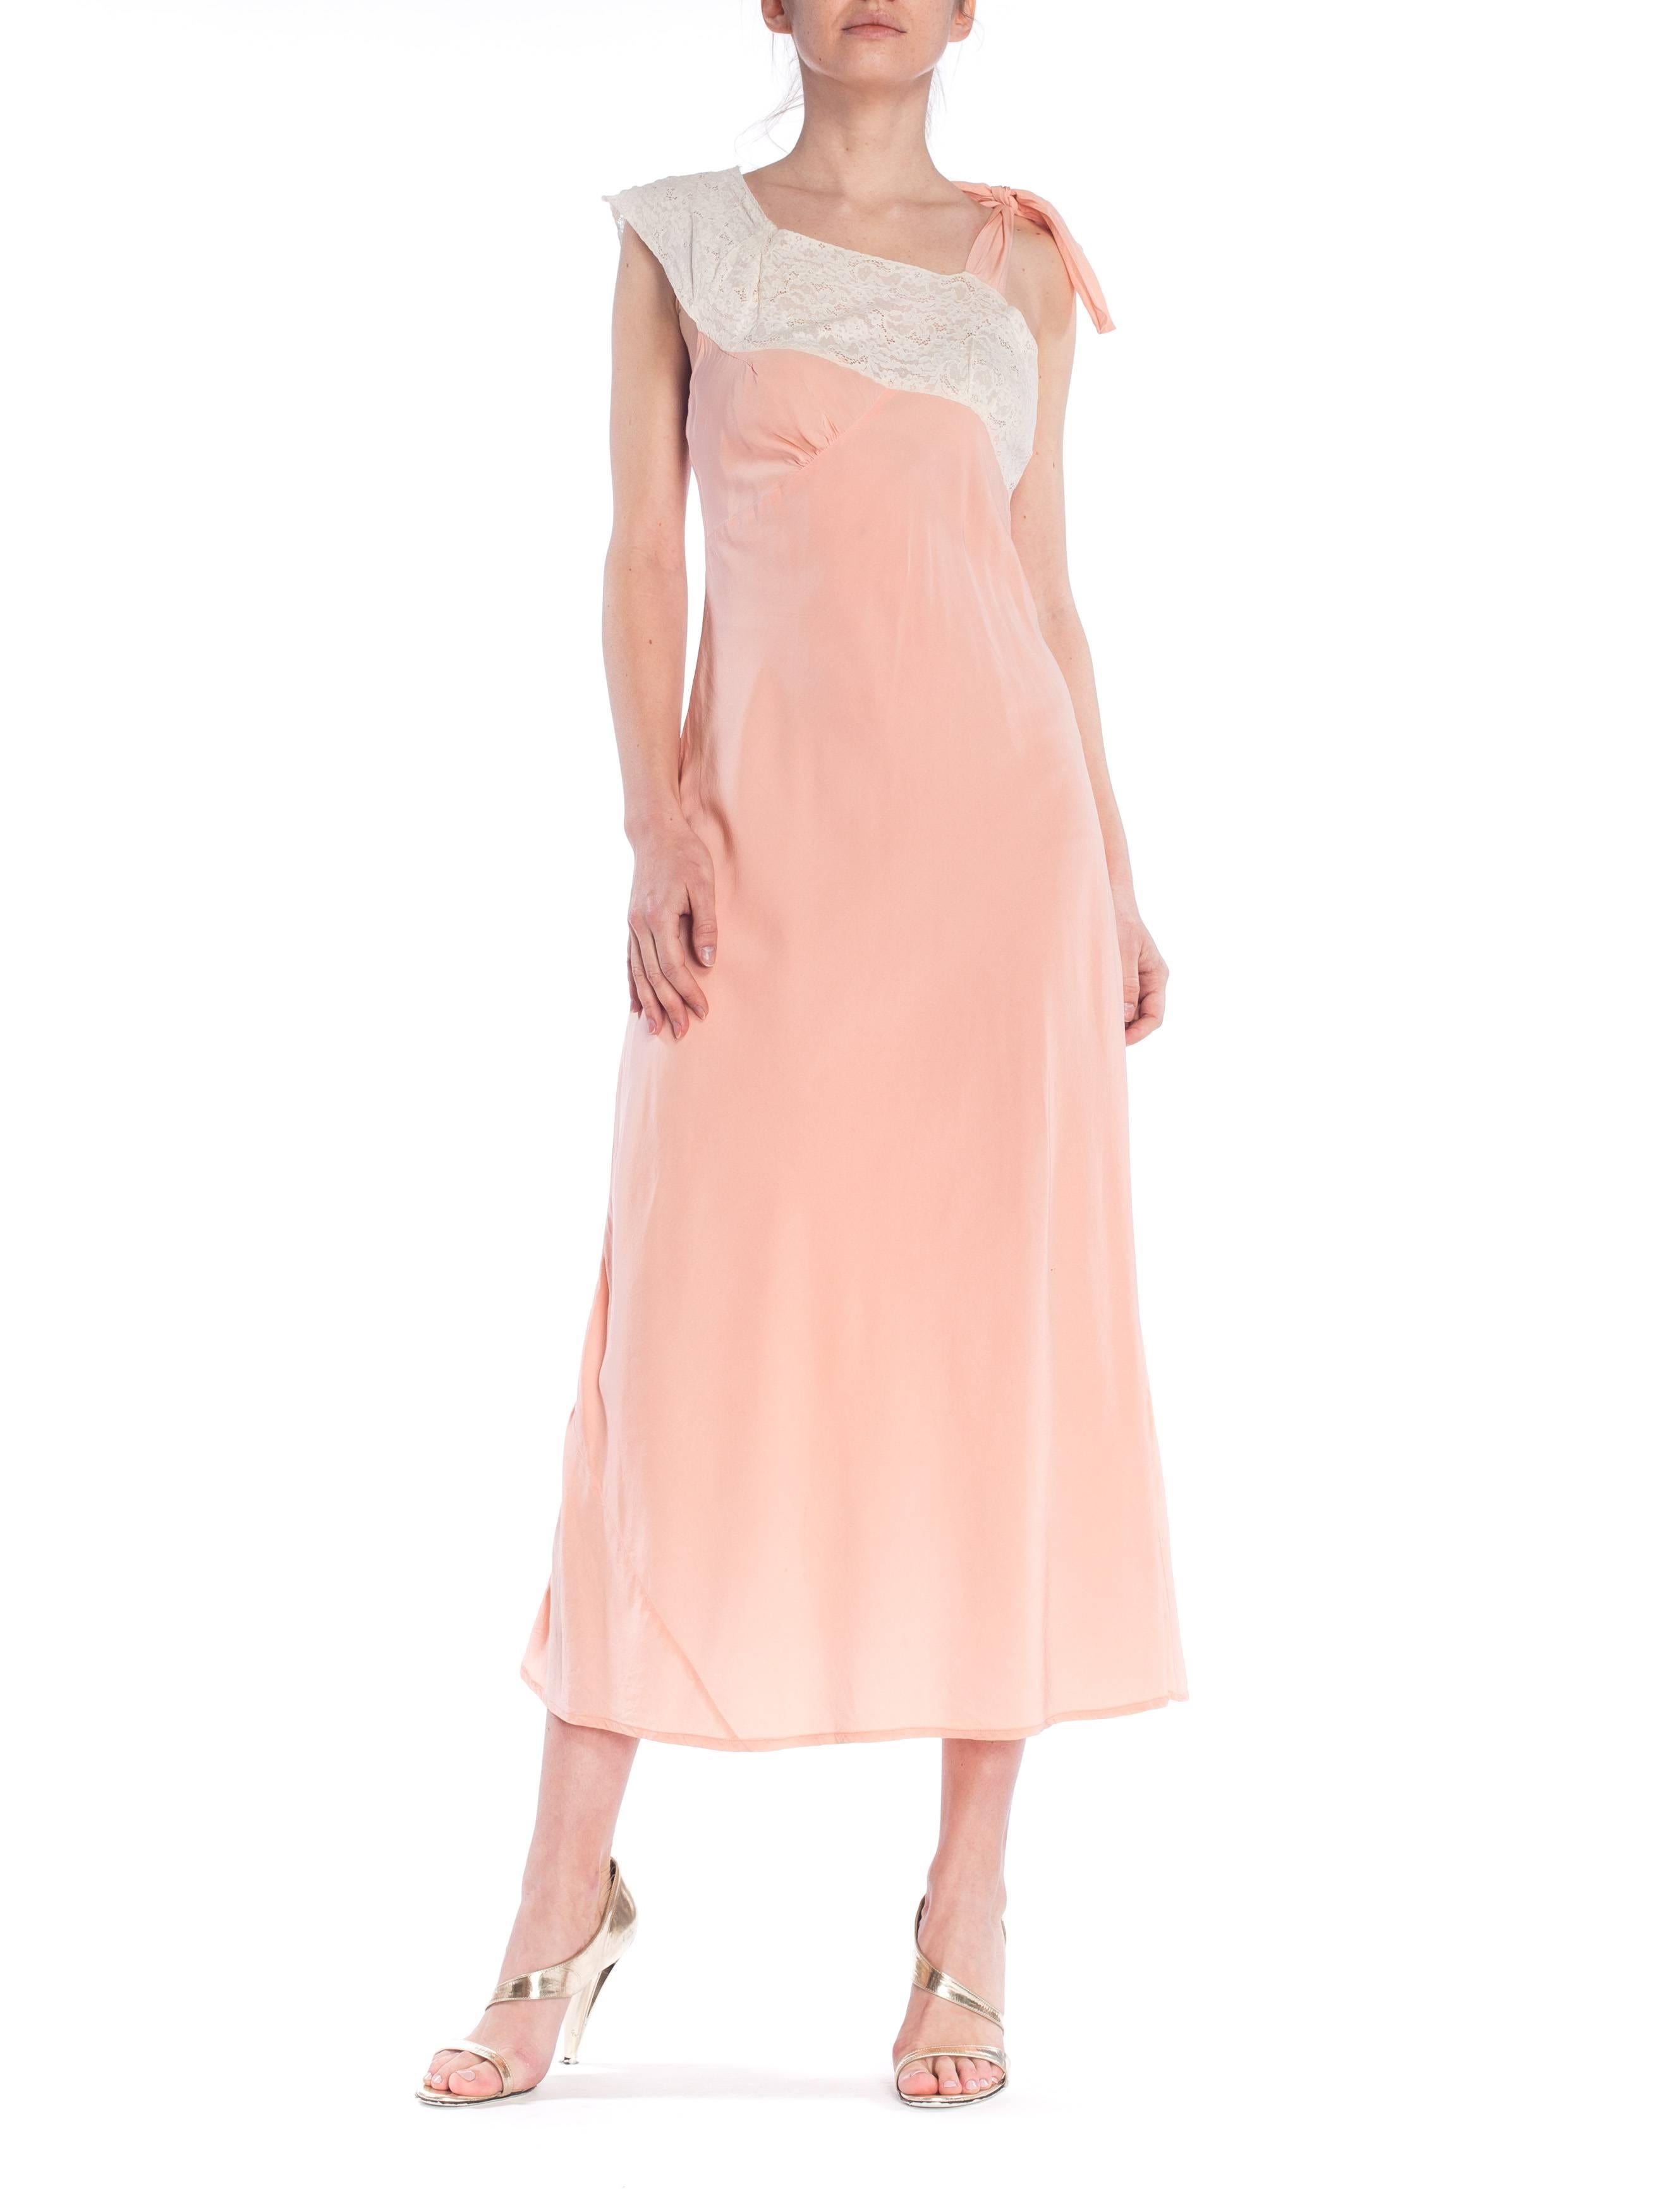 1930S Baby Pink Bias Cut Rayon & Lace Rare Unique Asymmetrical Slip DressNegli In Excellent Condition For Sale In New York, NY